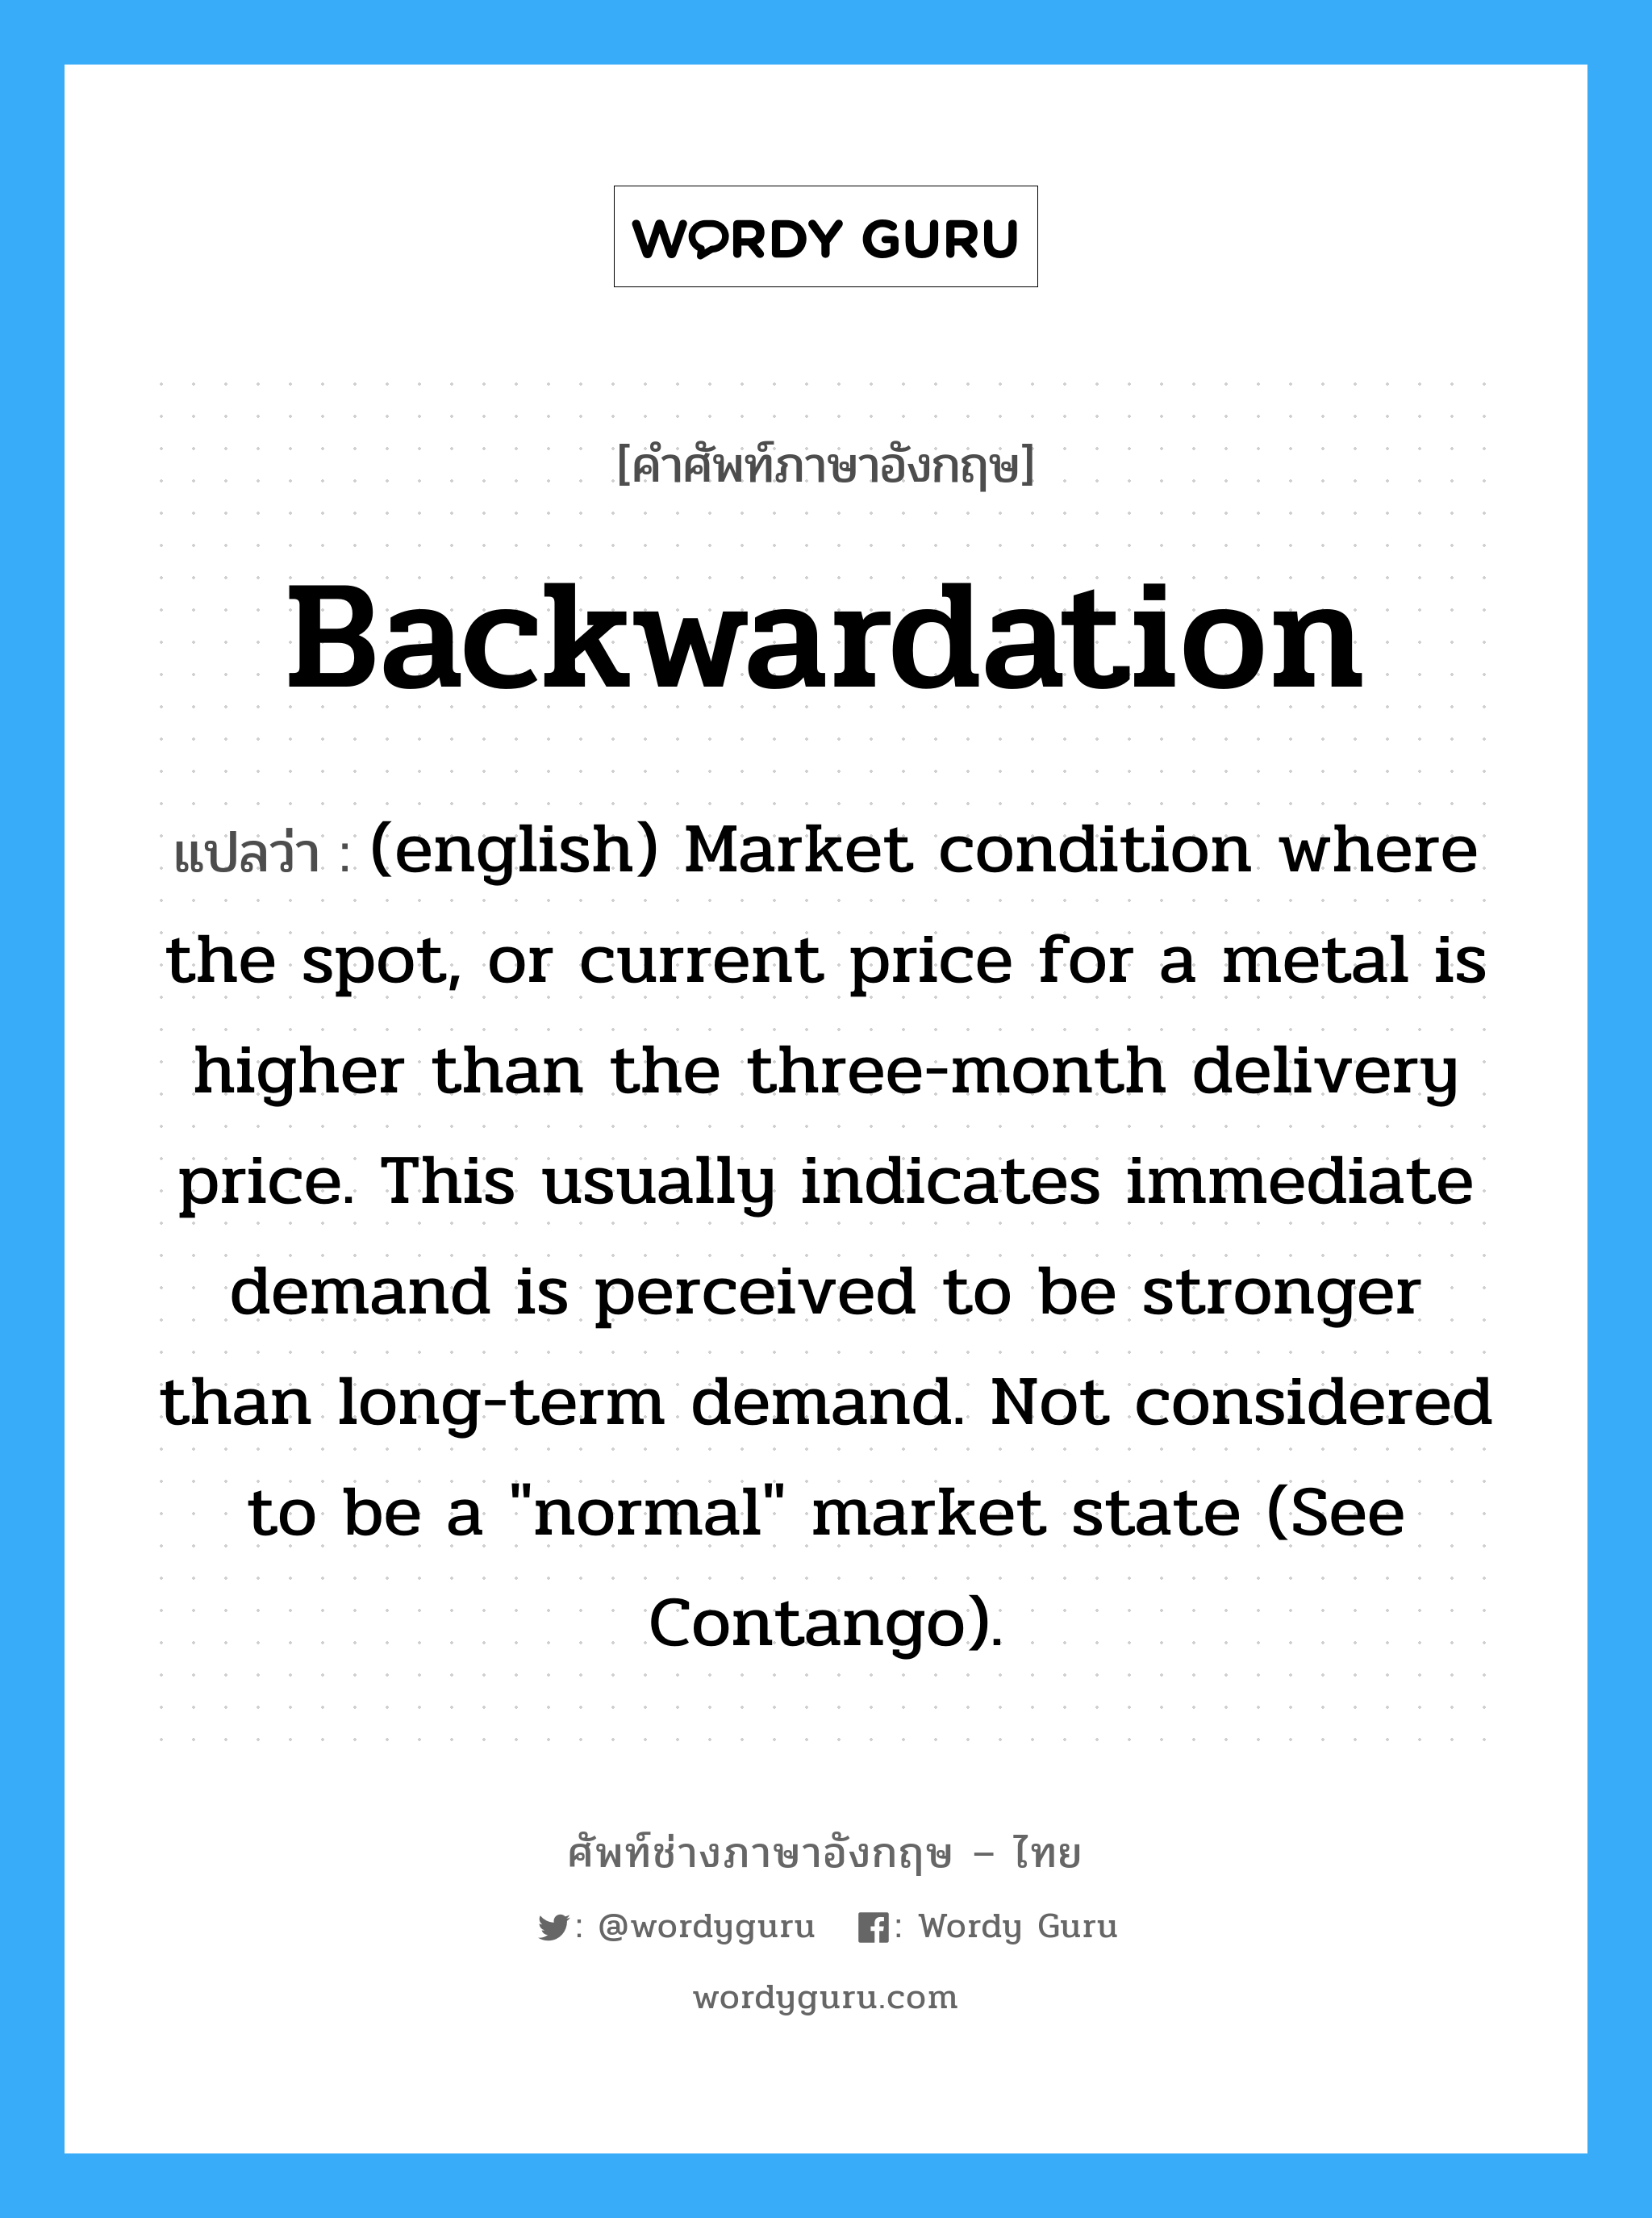 Backwardation แปลว่า?, คำศัพท์ช่างภาษาอังกฤษ - ไทย Backwardation คำศัพท์ภาษาอังกฤษ Backwardation แปลว่า (english) Market condition where the spot, or current price for a metal is higher than the three-month delivery price. This usually indicates immediate demand is perceived to be stronger than long-term demand. Not considered to be a "normal" market state (See Contango).